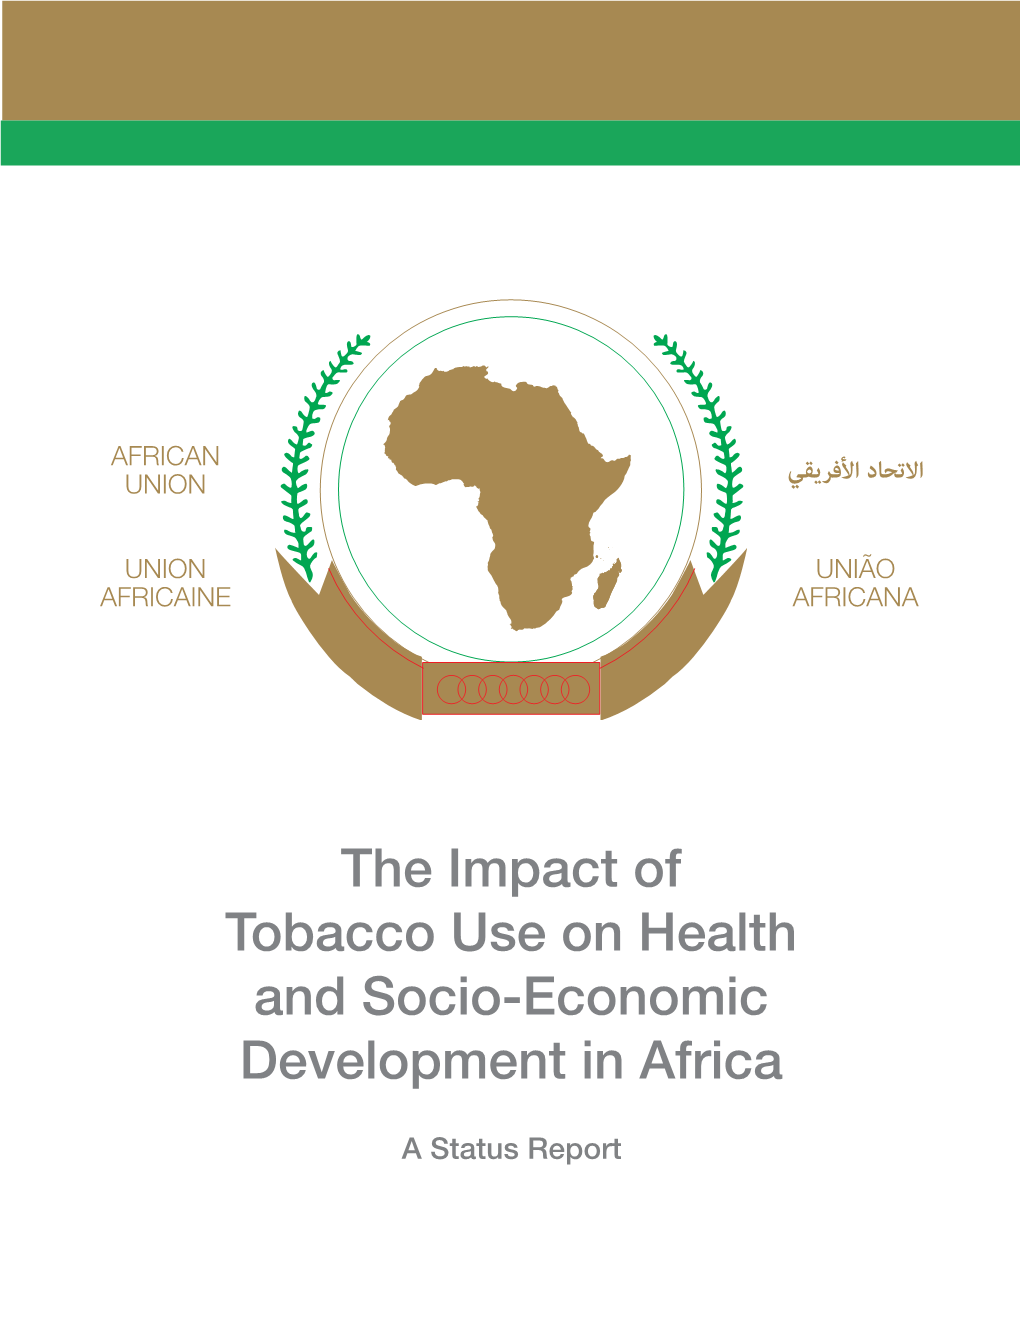 The Impact of Tobacco Use on Health and Socio-Economic Development in Africa